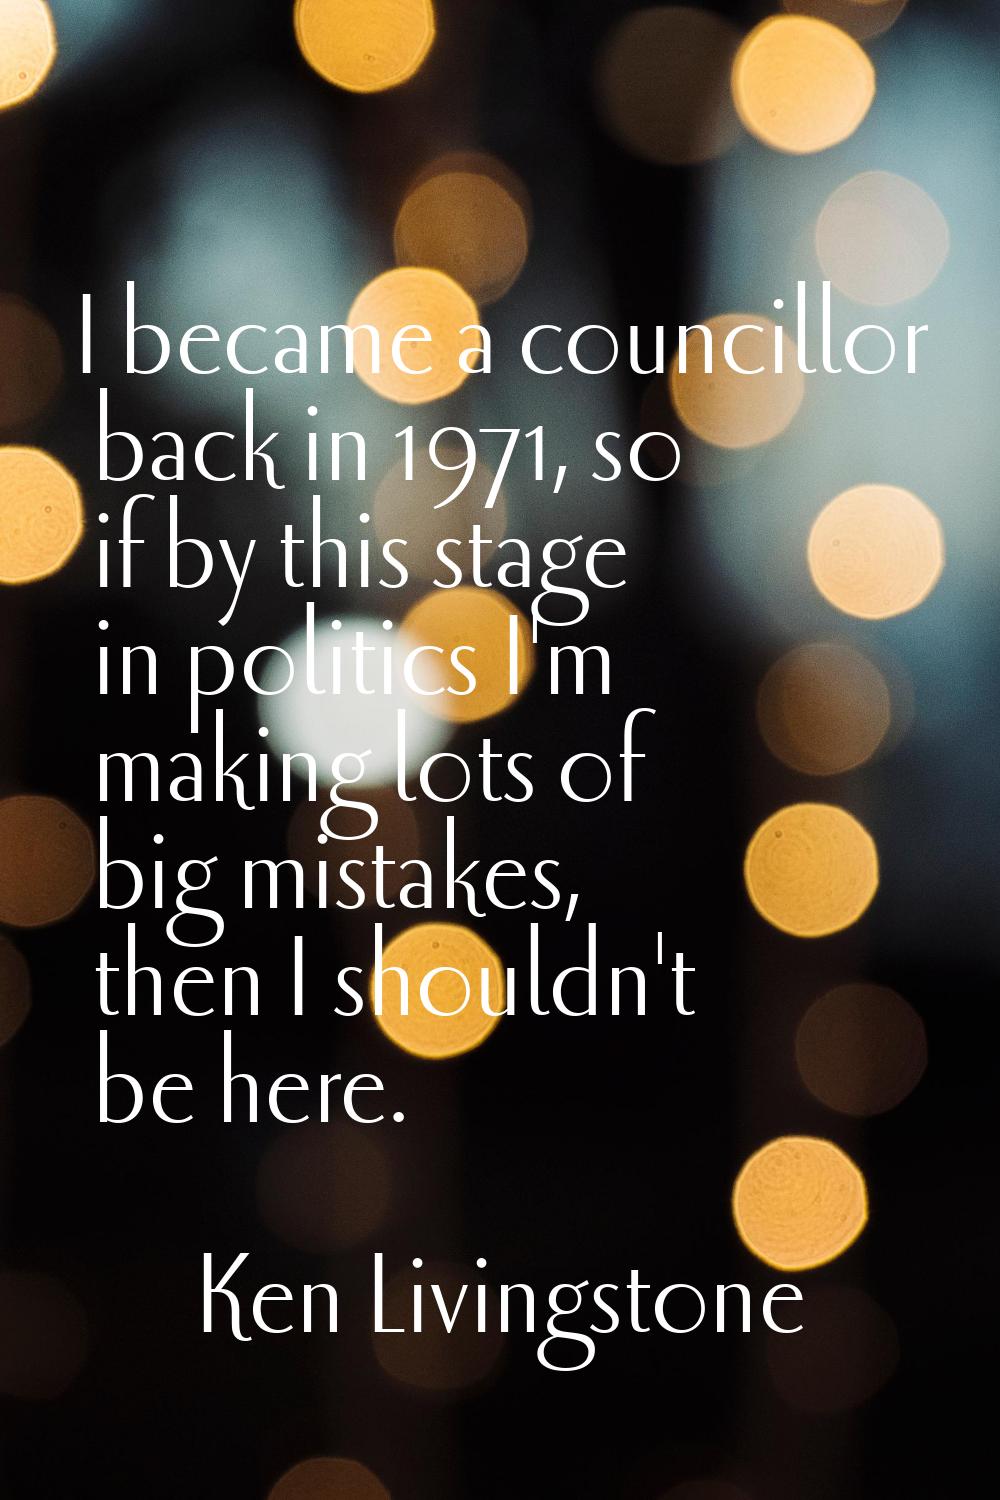 I became a councillor back in 1971, so if by this stage in politics I'm making lots of big mistakes